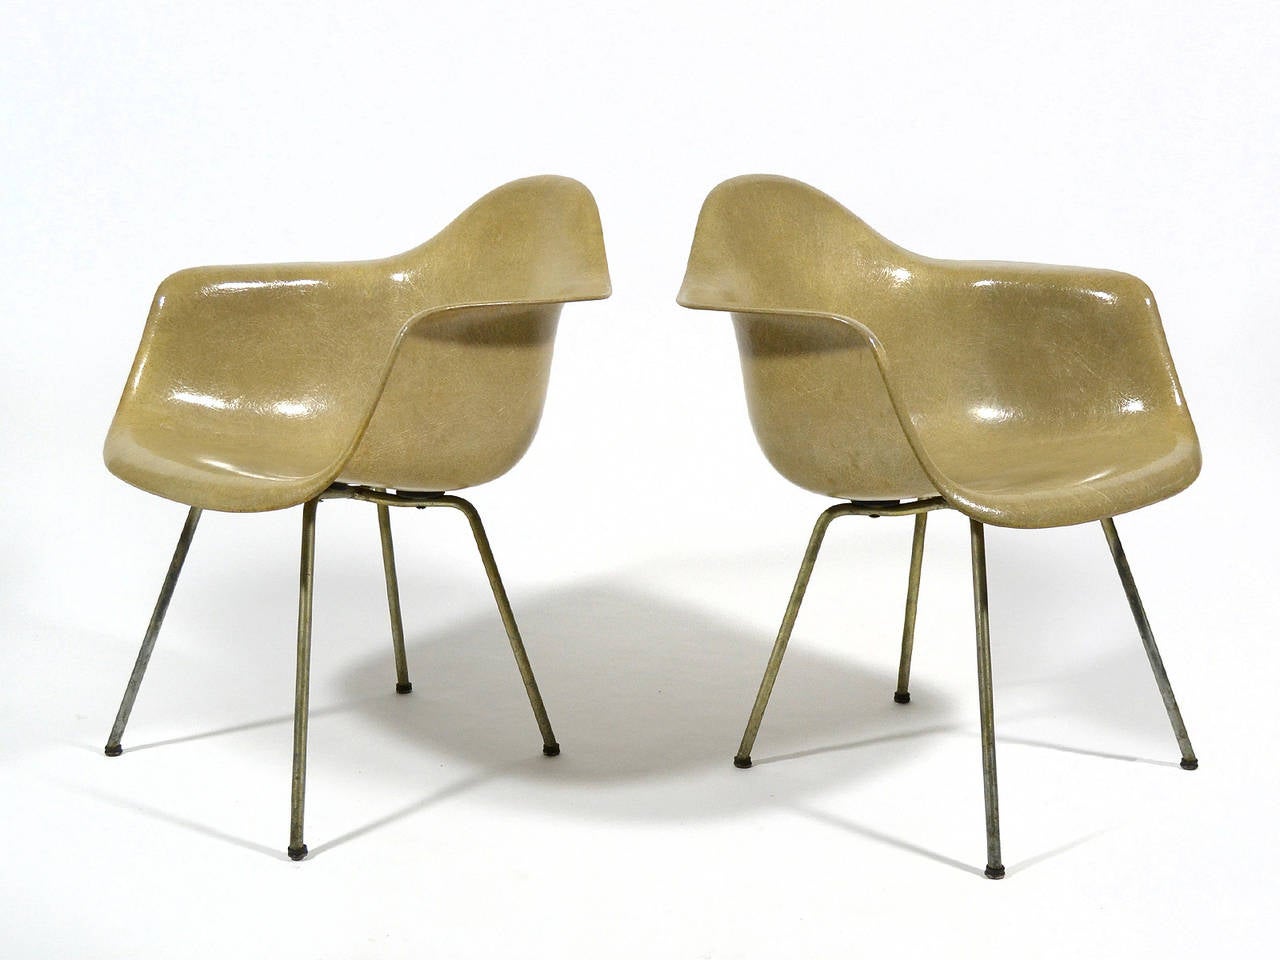 These very early armchairs by Charles and Ray Eames have all the details that collectors look for and which distinguish them so greatly from later production and especially re-issued chairs. They have the uncommon greige color and solid X bases of